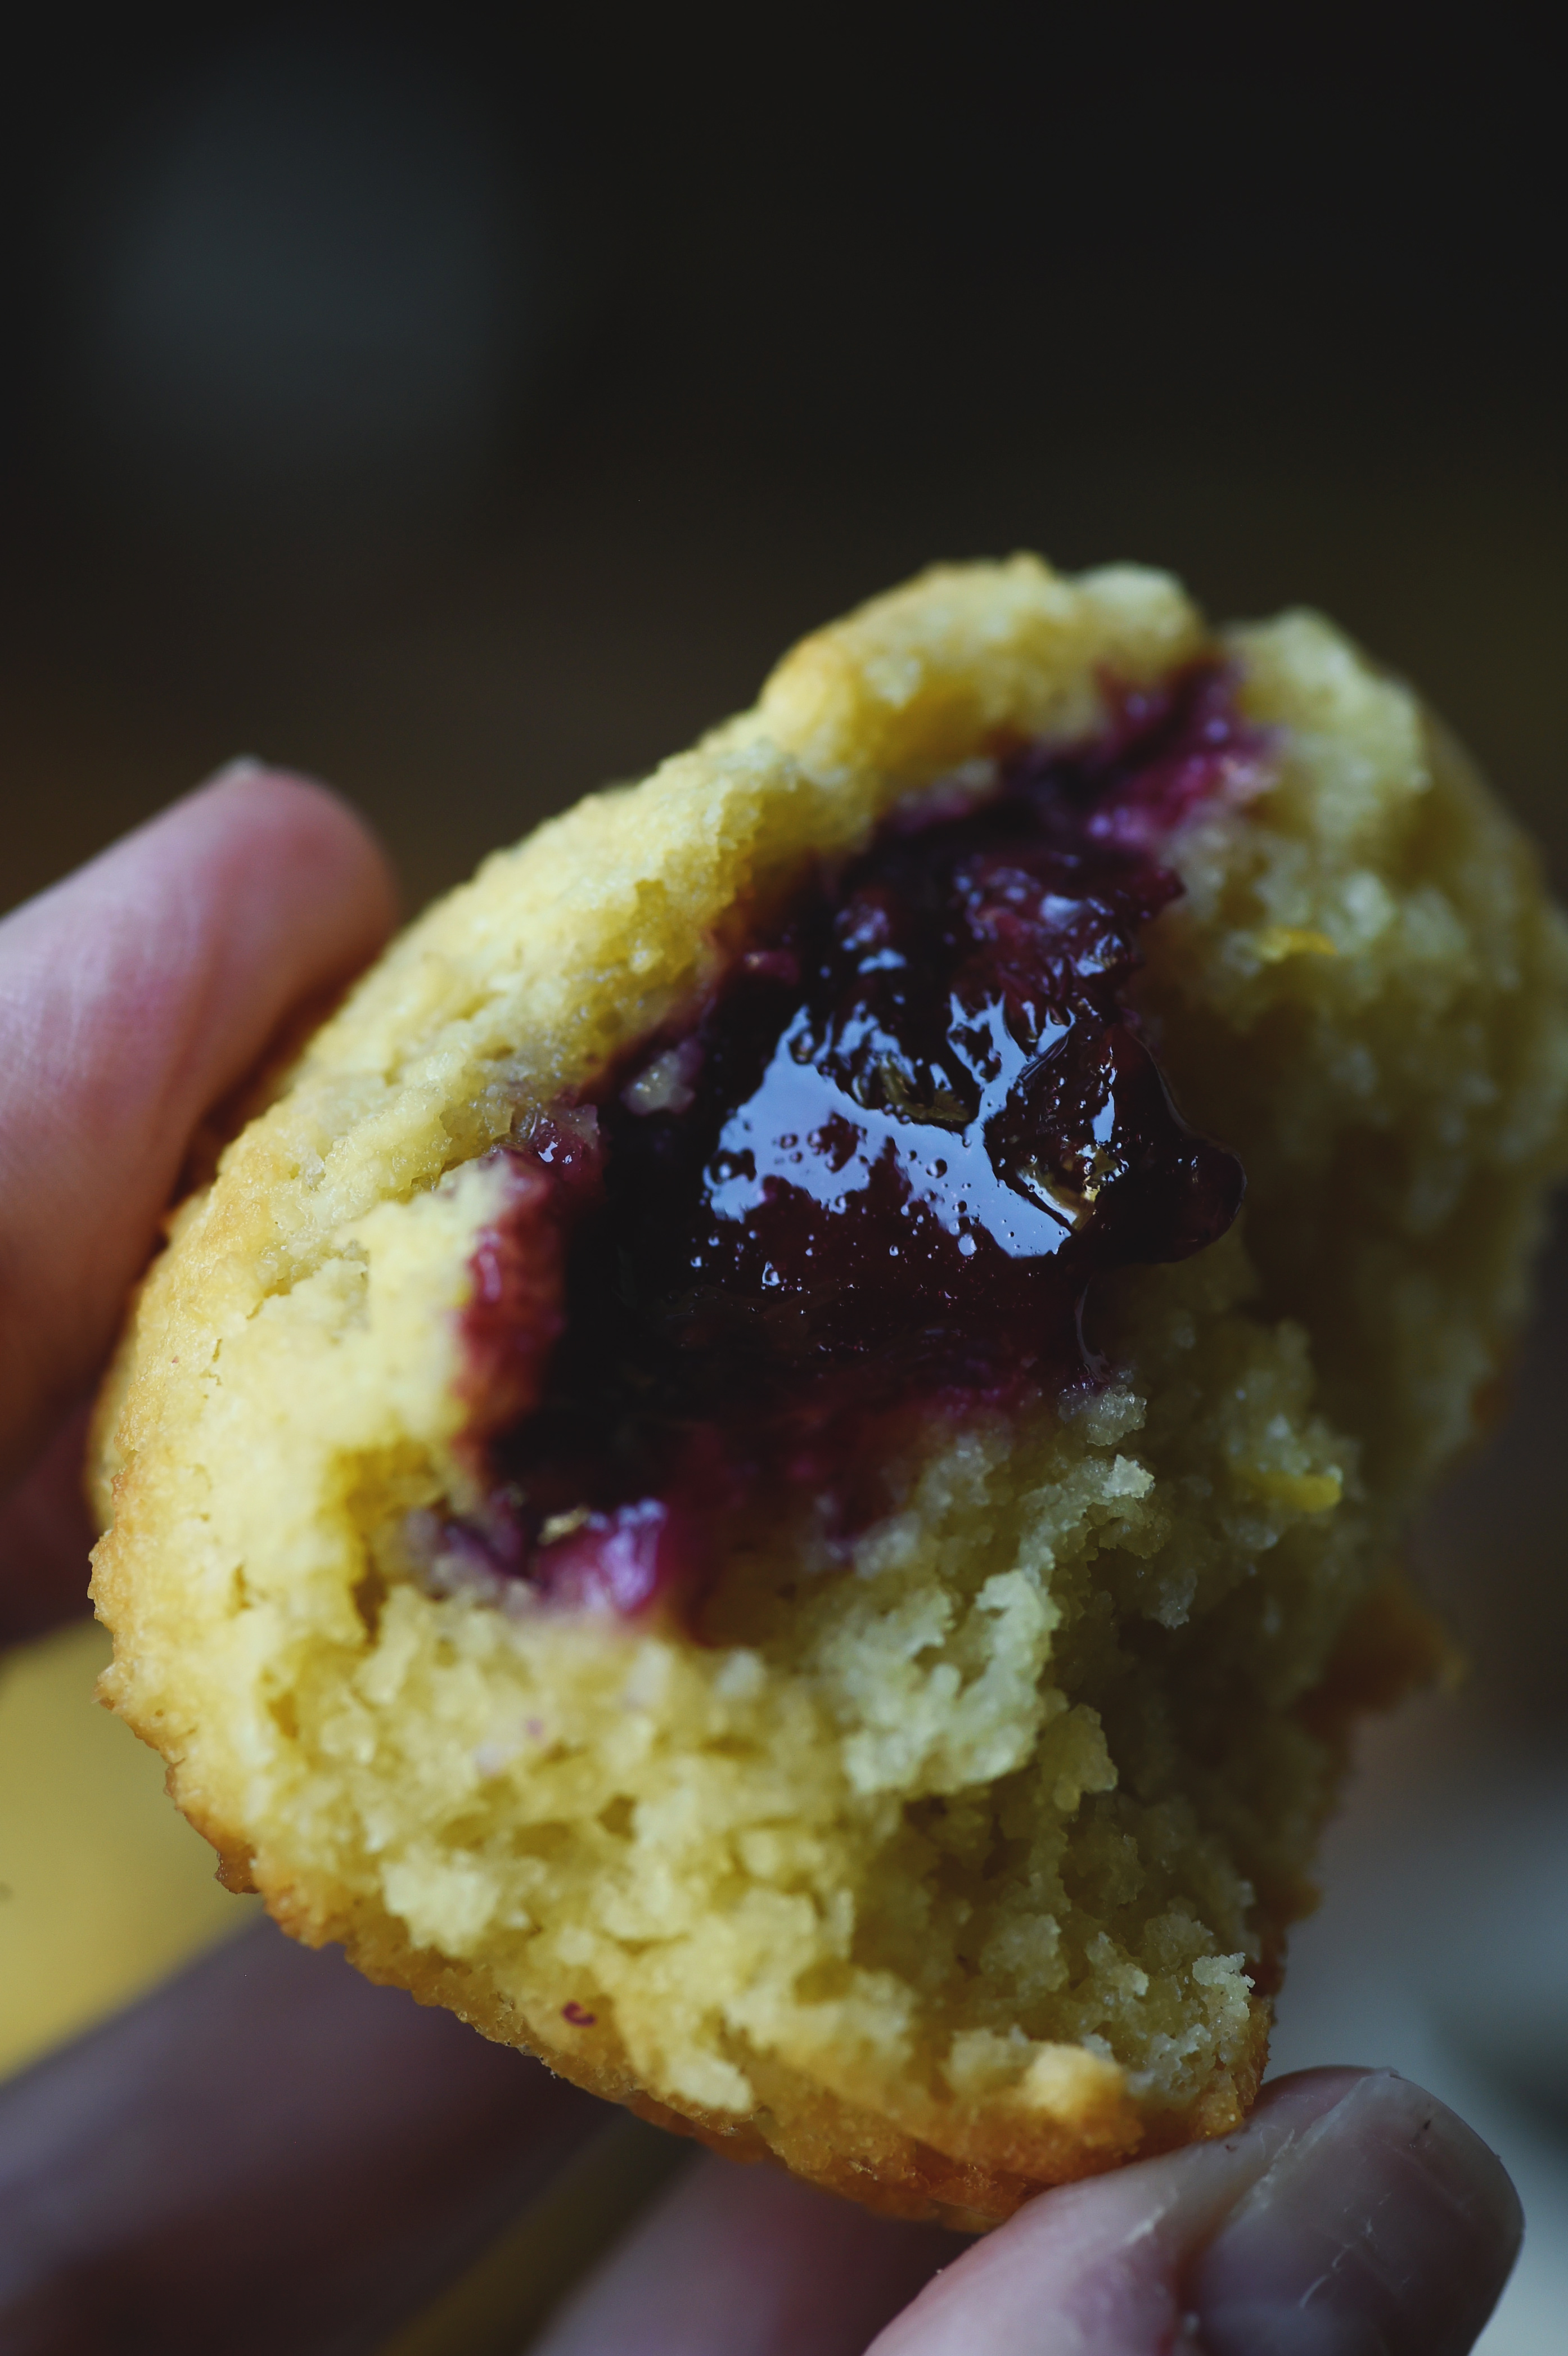 Low-Carb Blackberry-Filled Lemon Almond Flour Muffins-close-up of muffin inside.